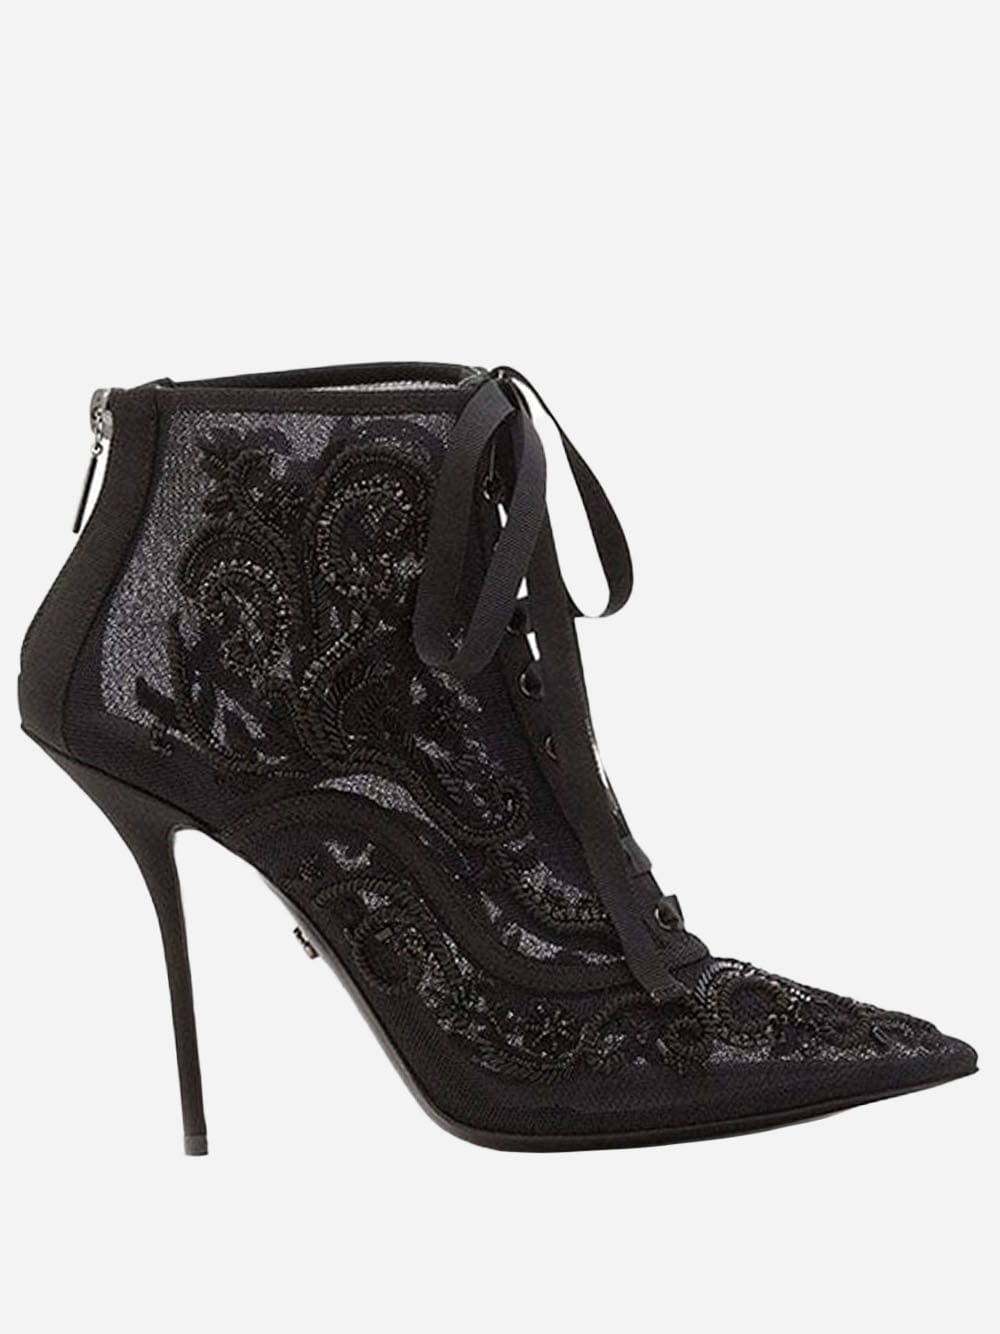 Dolce & Gabbana Embroidered Lace-Up Ankle Boots